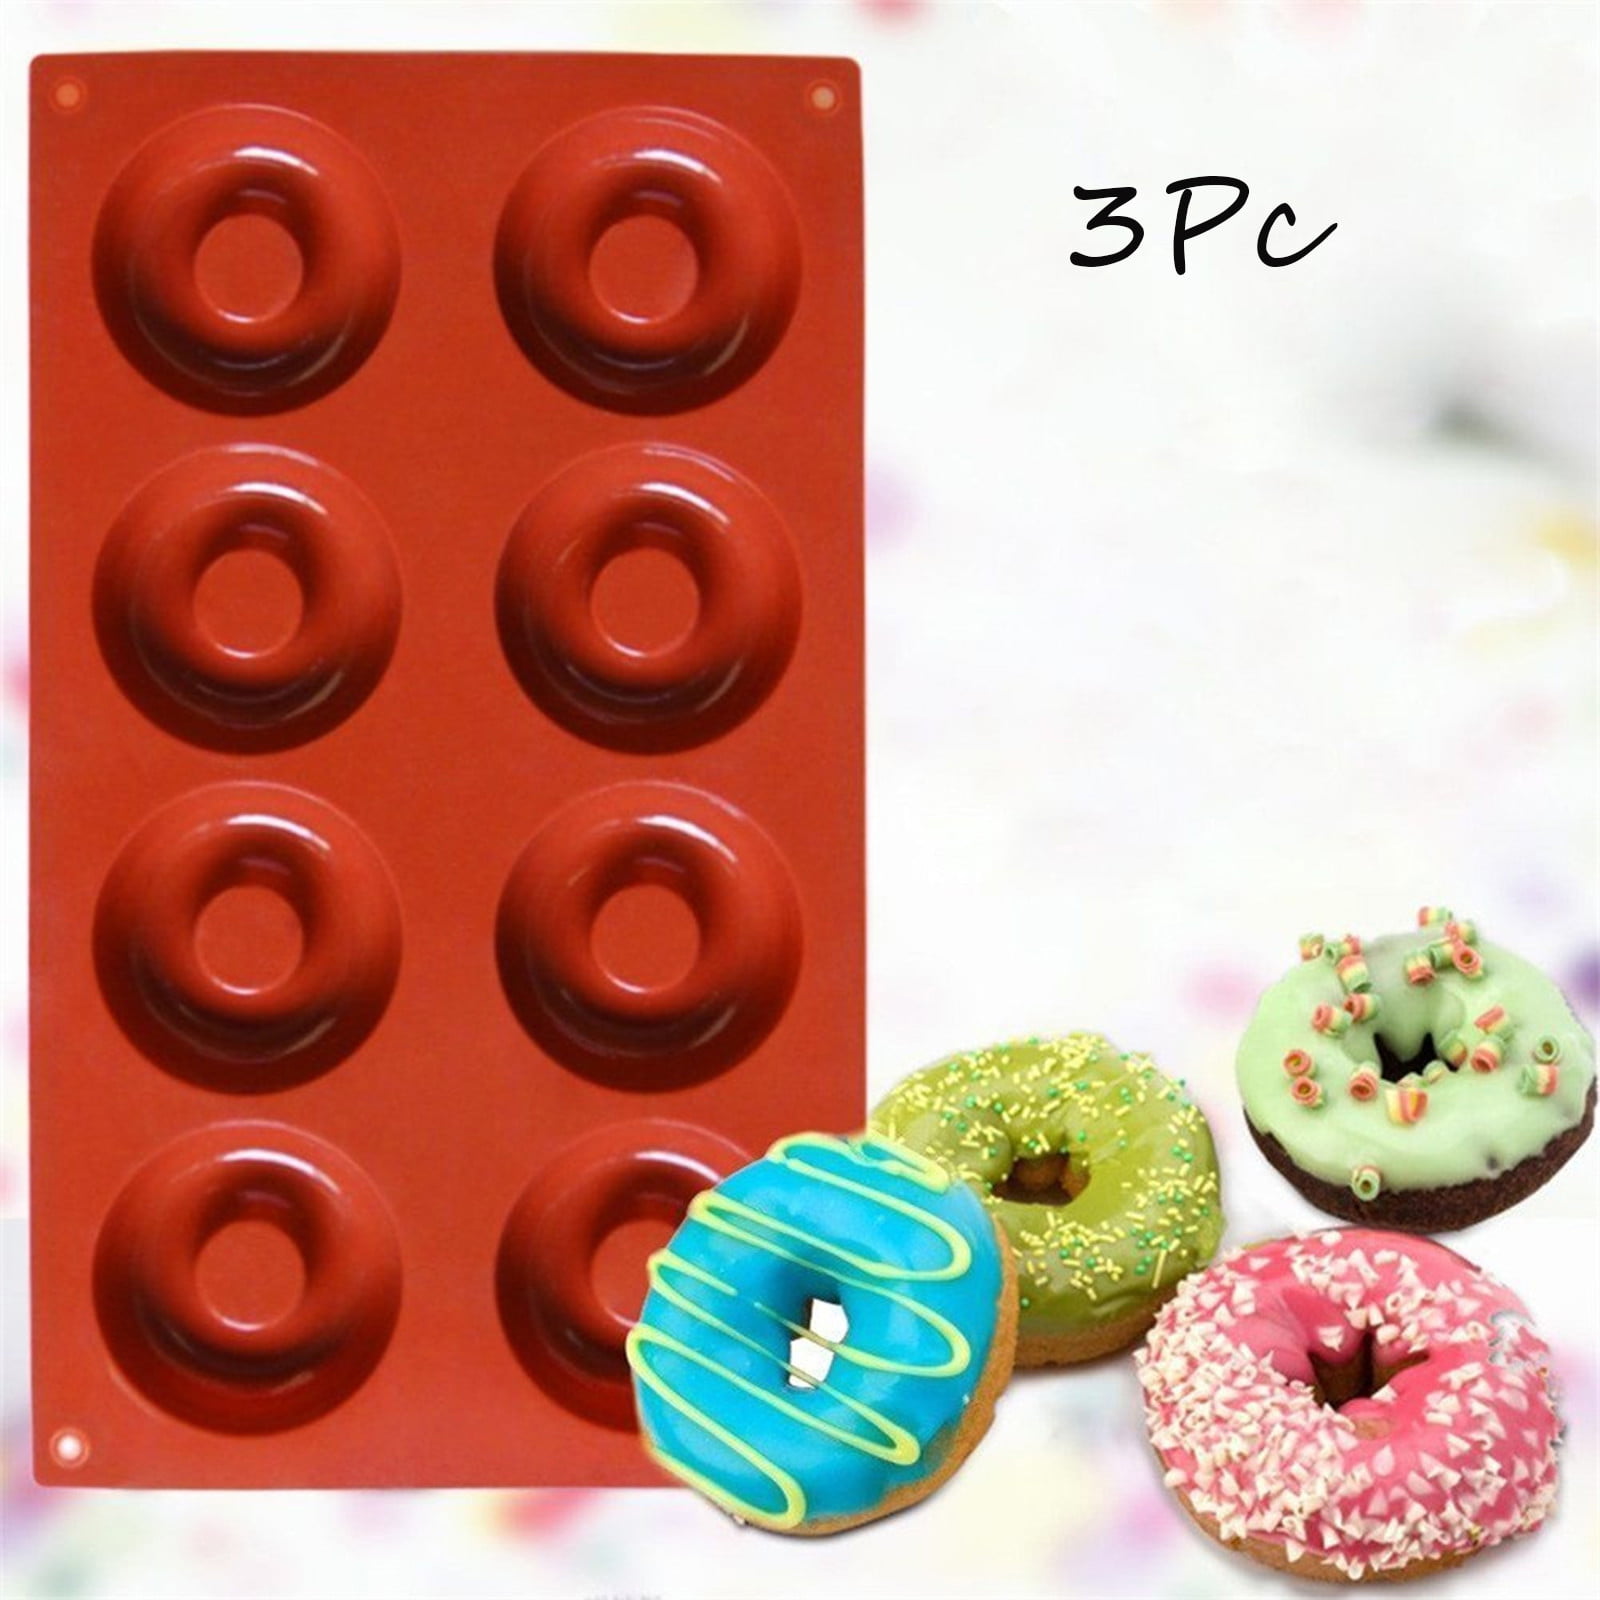 Silicone Cupcake Mold Muffin Chocolate Cake Candy Cookie Baking Mould Pan Tools 